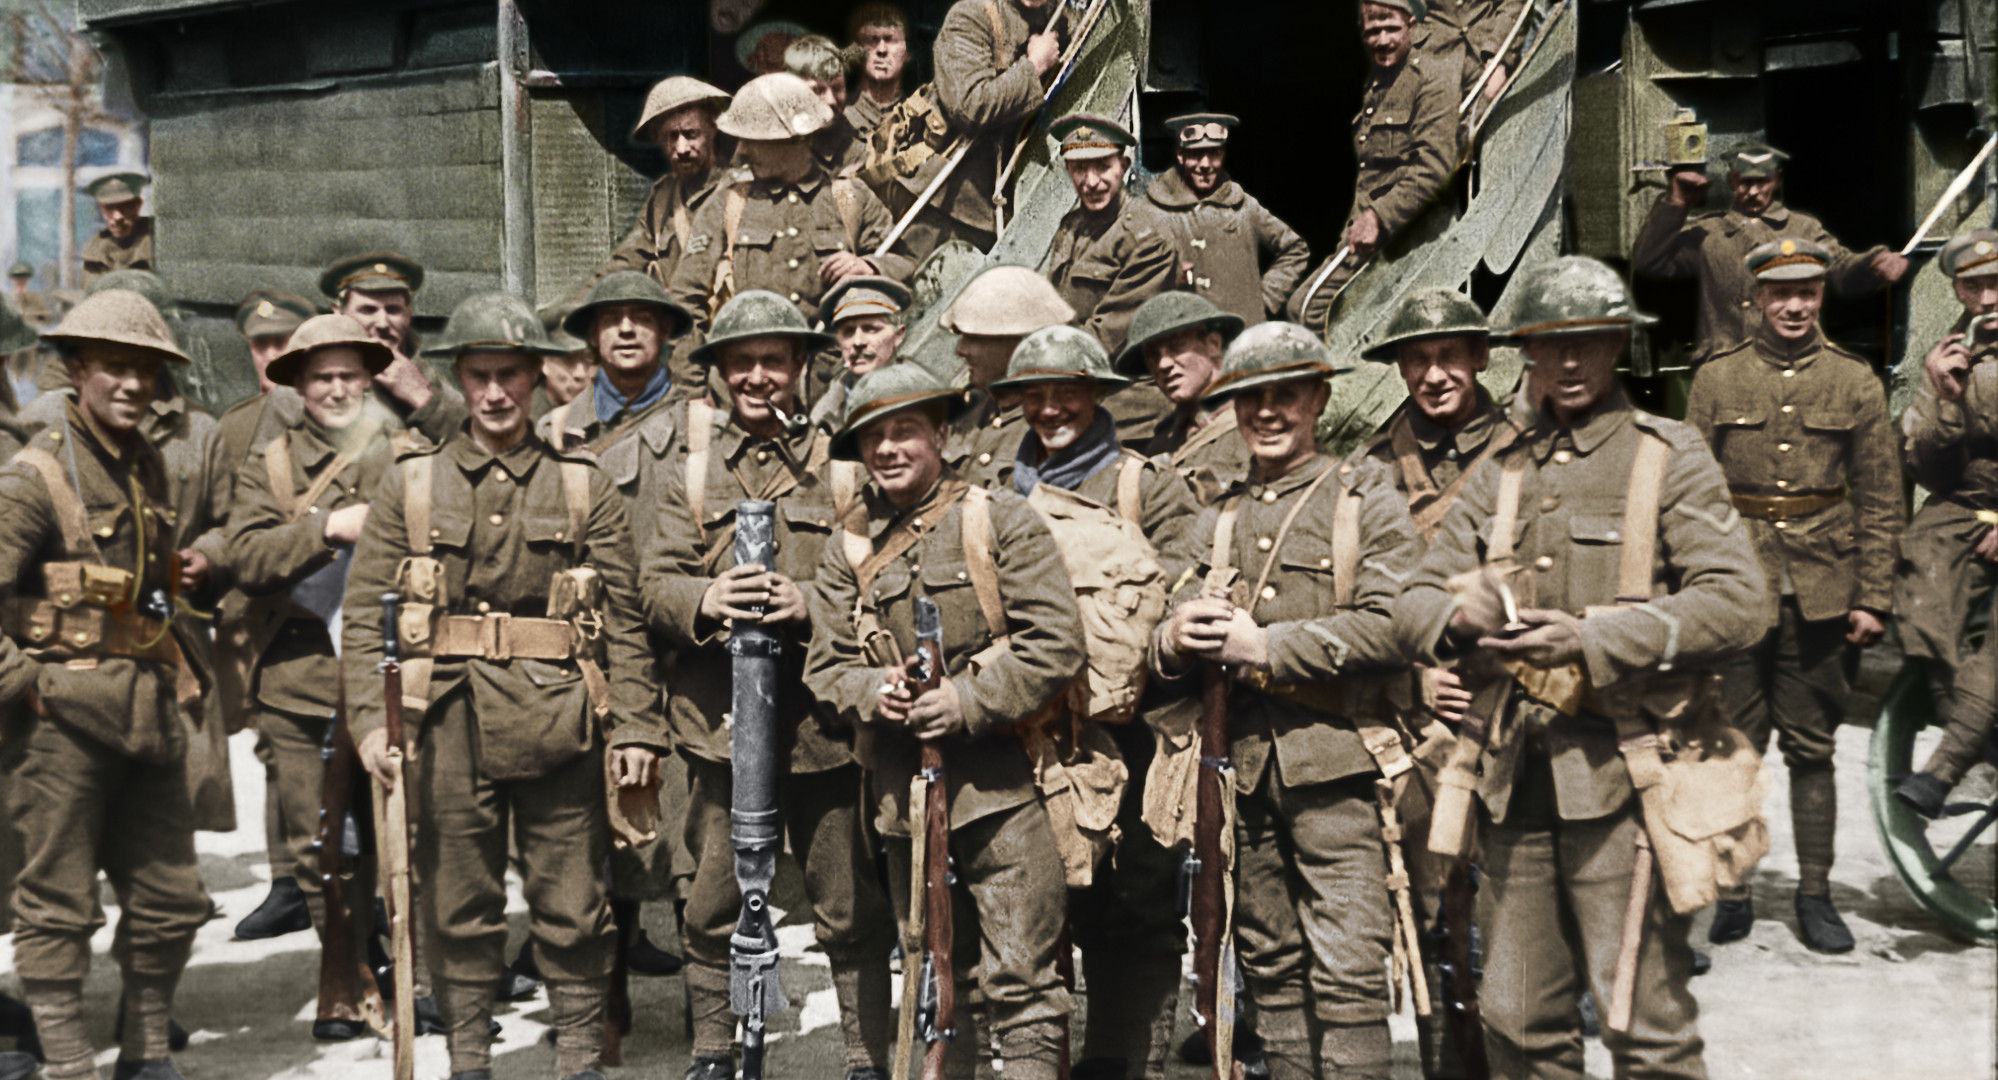 They Shall Not Grow Old: Scene Image 7